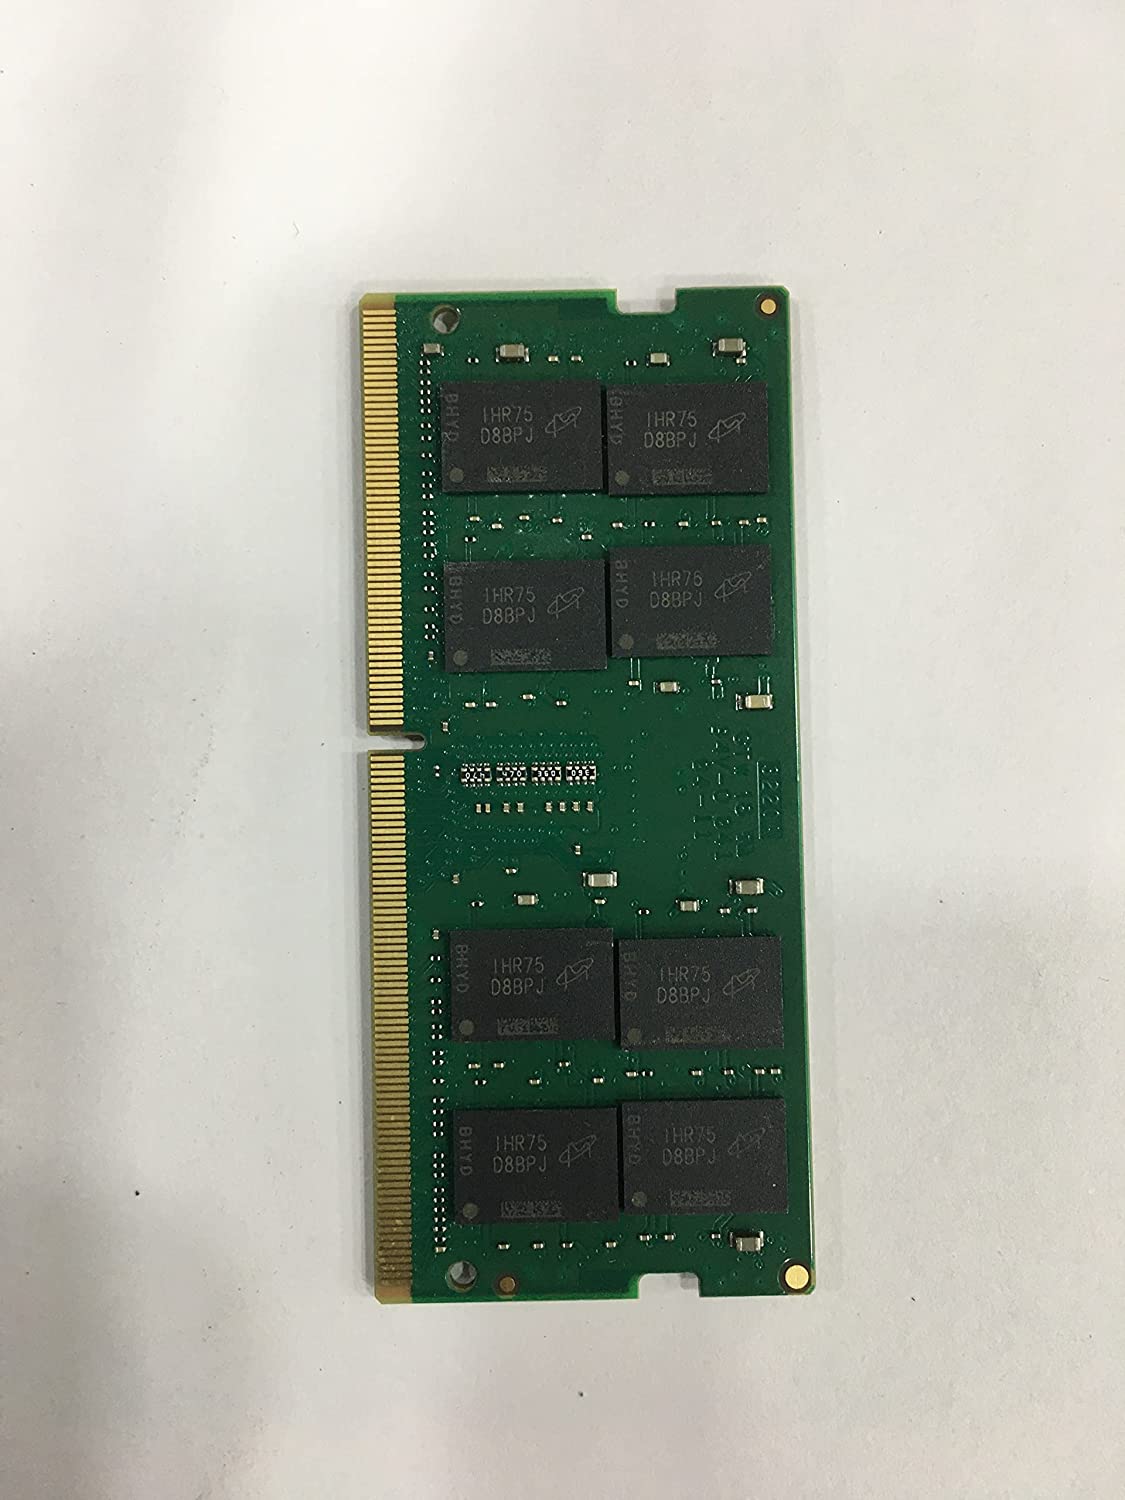 or 16GB DDR4 2933MHz – 2666MHz) (or Crucial Memo 3200MHz Laptop CL22 RAM